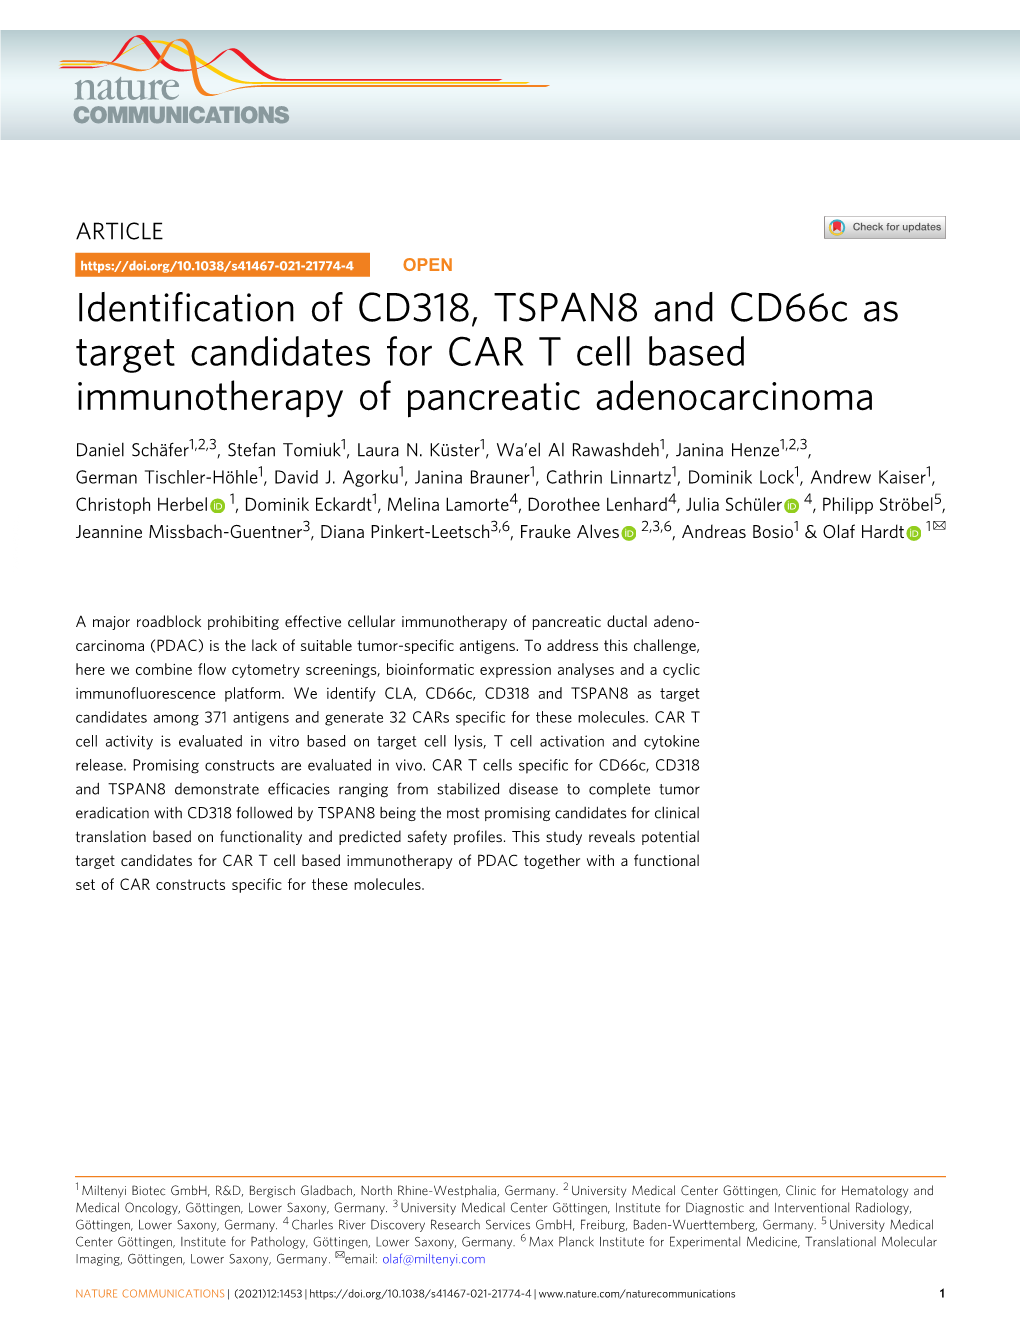 Identification of CD318, TSPAN8 and Cd66c As Target Candidates For